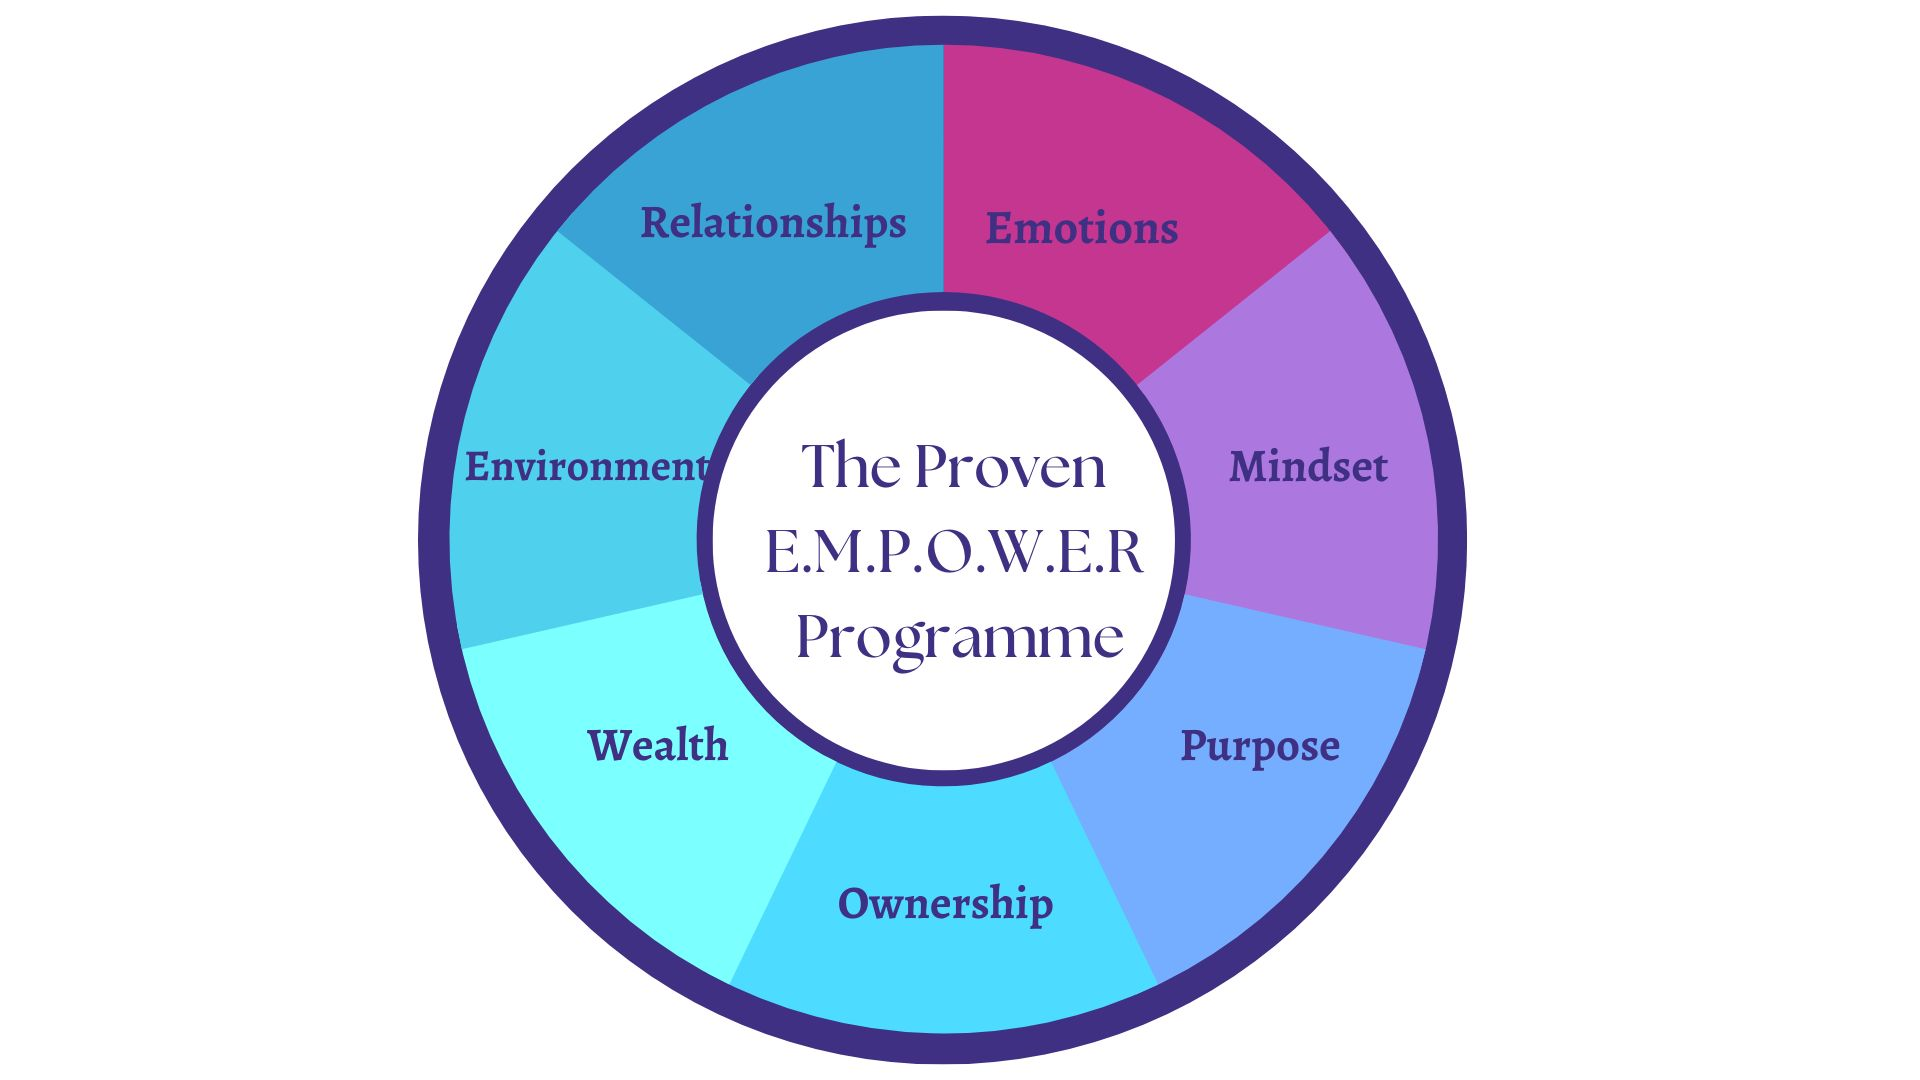 From Anxious to Empowered with the unique Proven E.M.P.O.W.E.R. Programme™